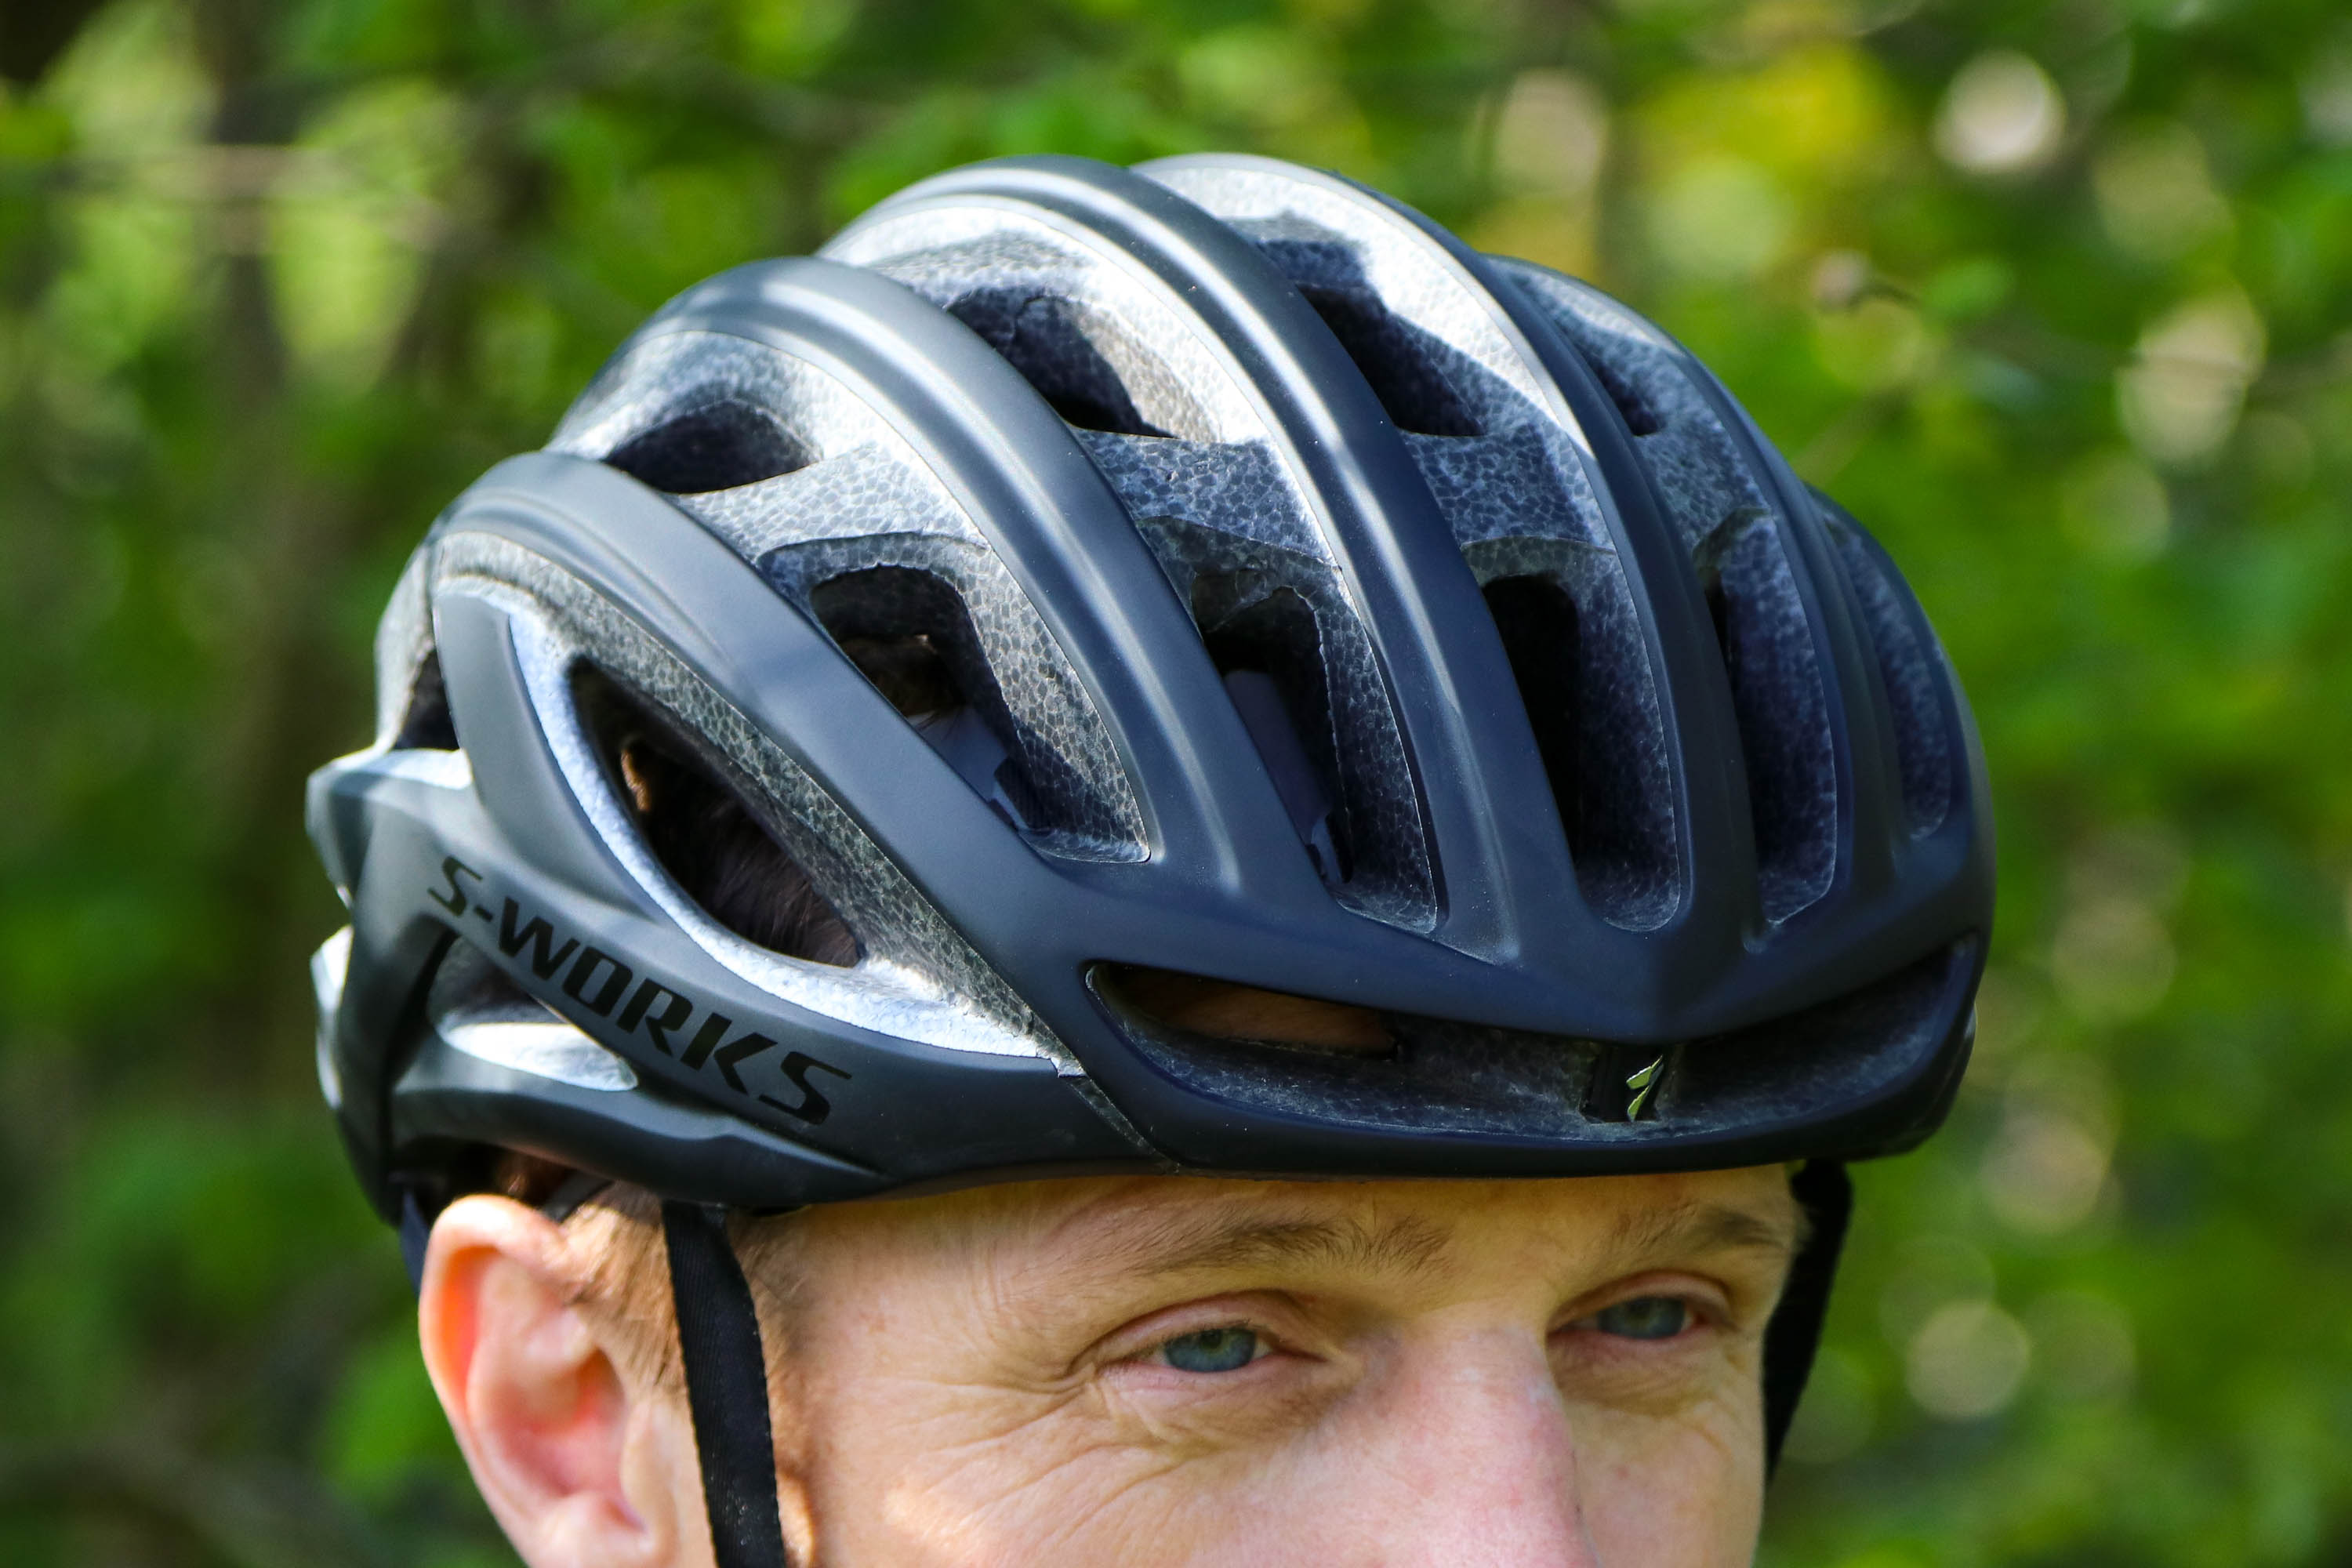 specialized helmet with light